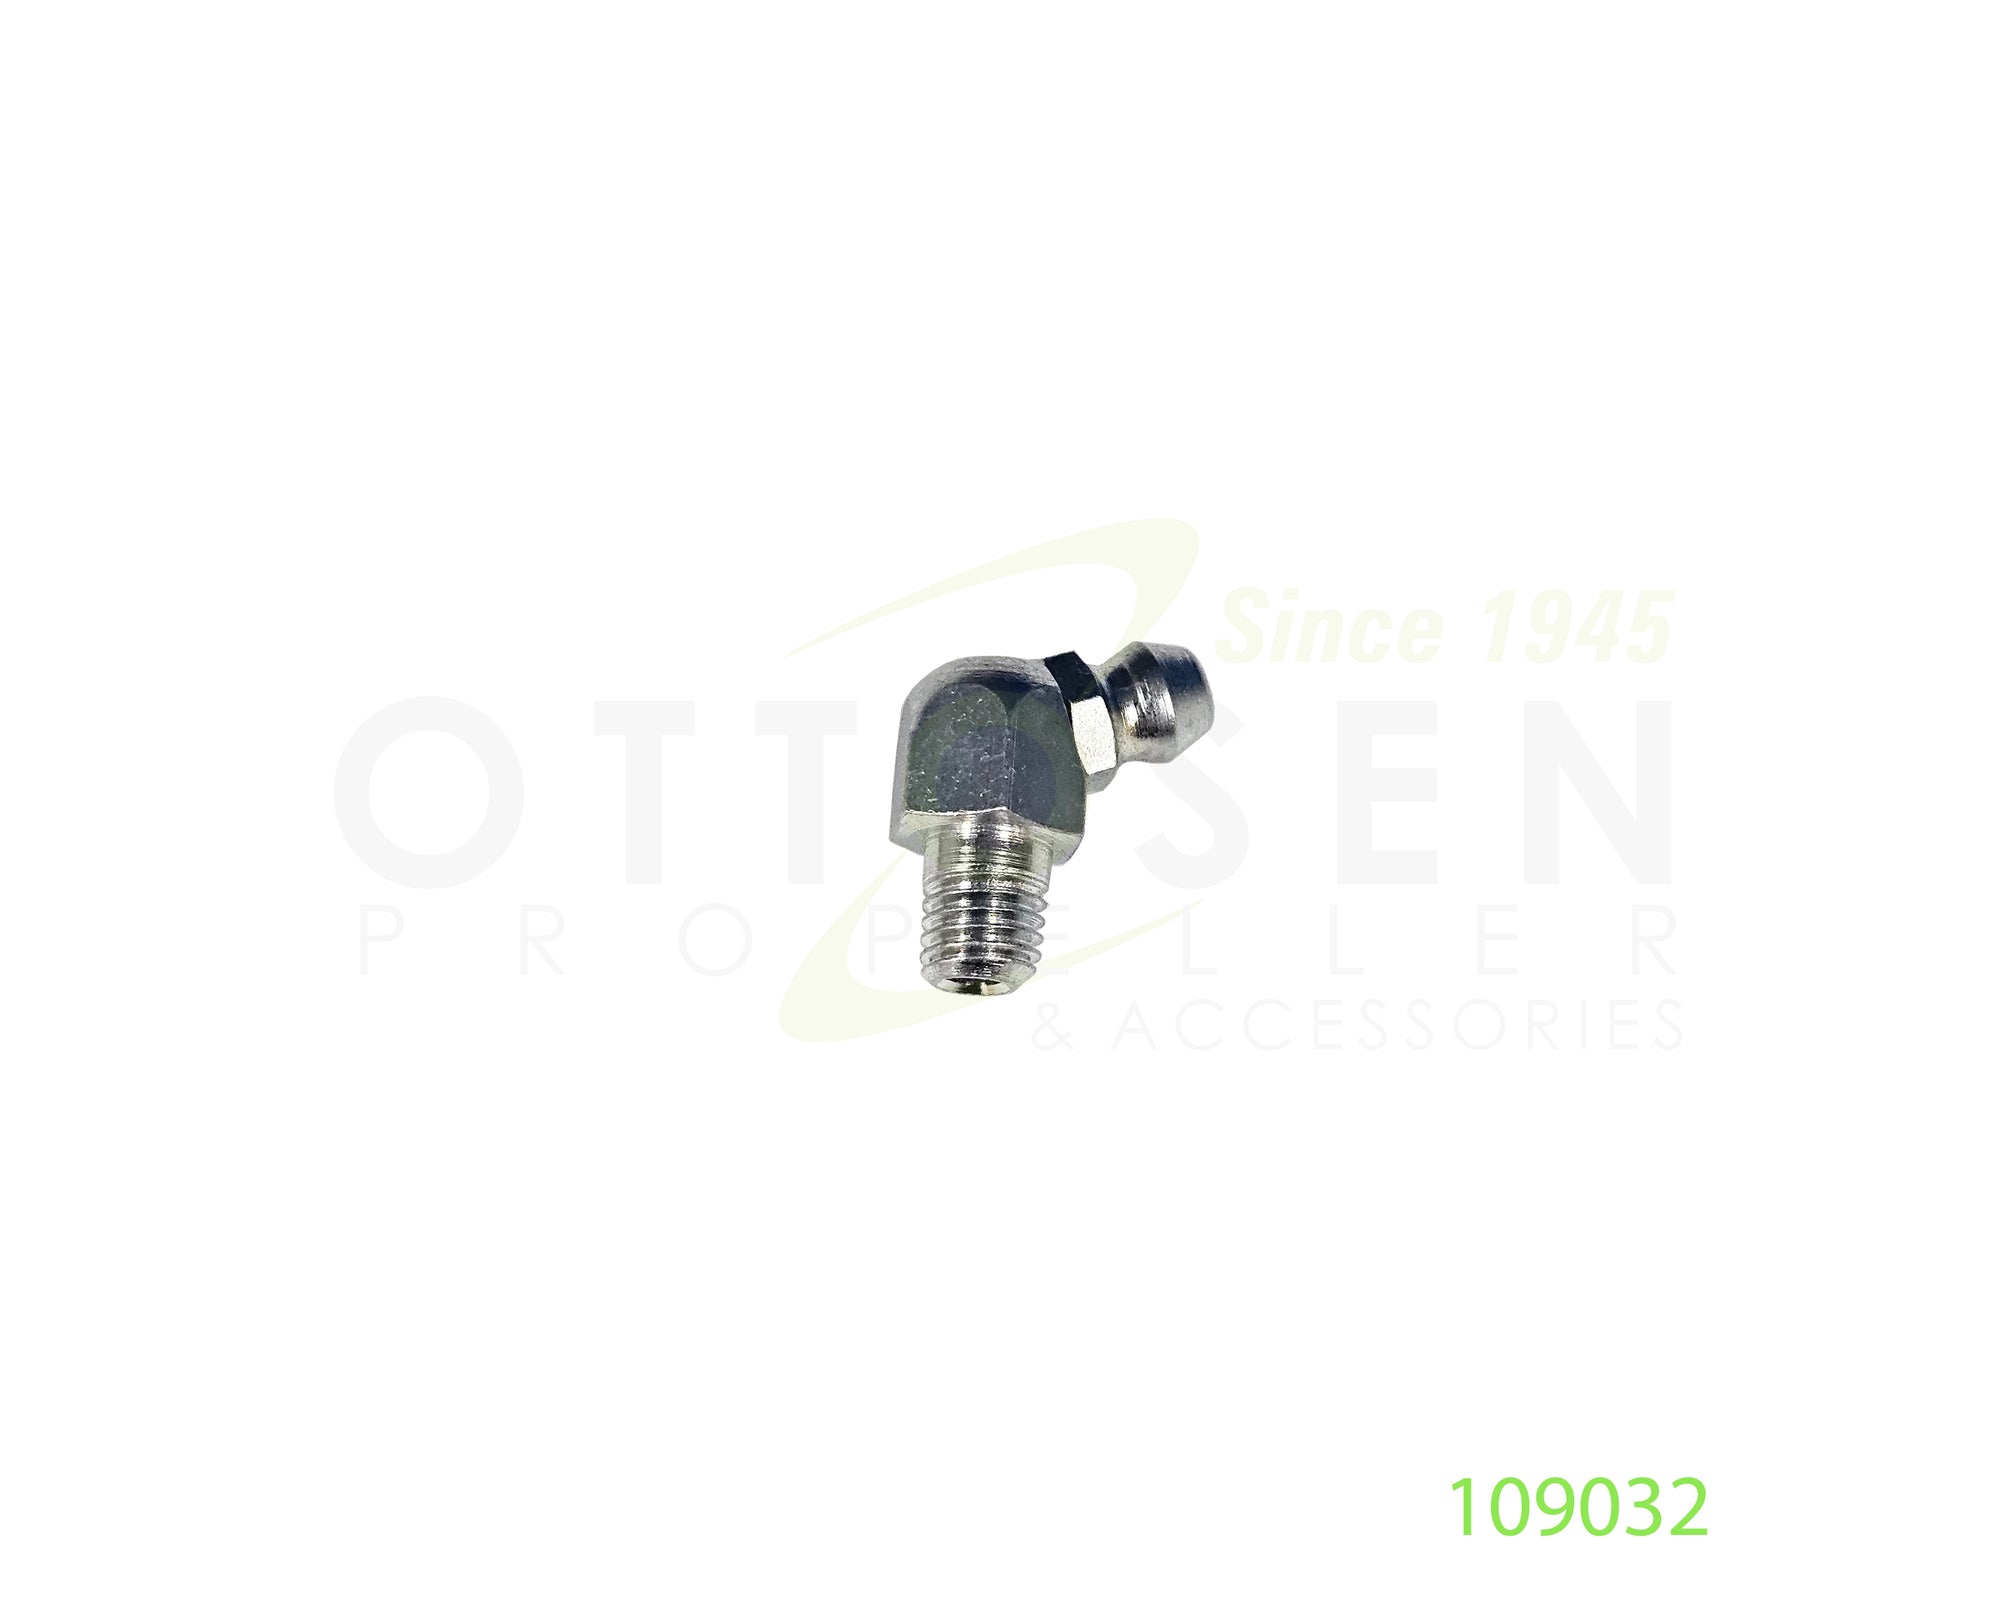 109032-HARTZELL-PROPELLER-LUBRICATION-FITTING-65-DEGREE-PICTURE-1